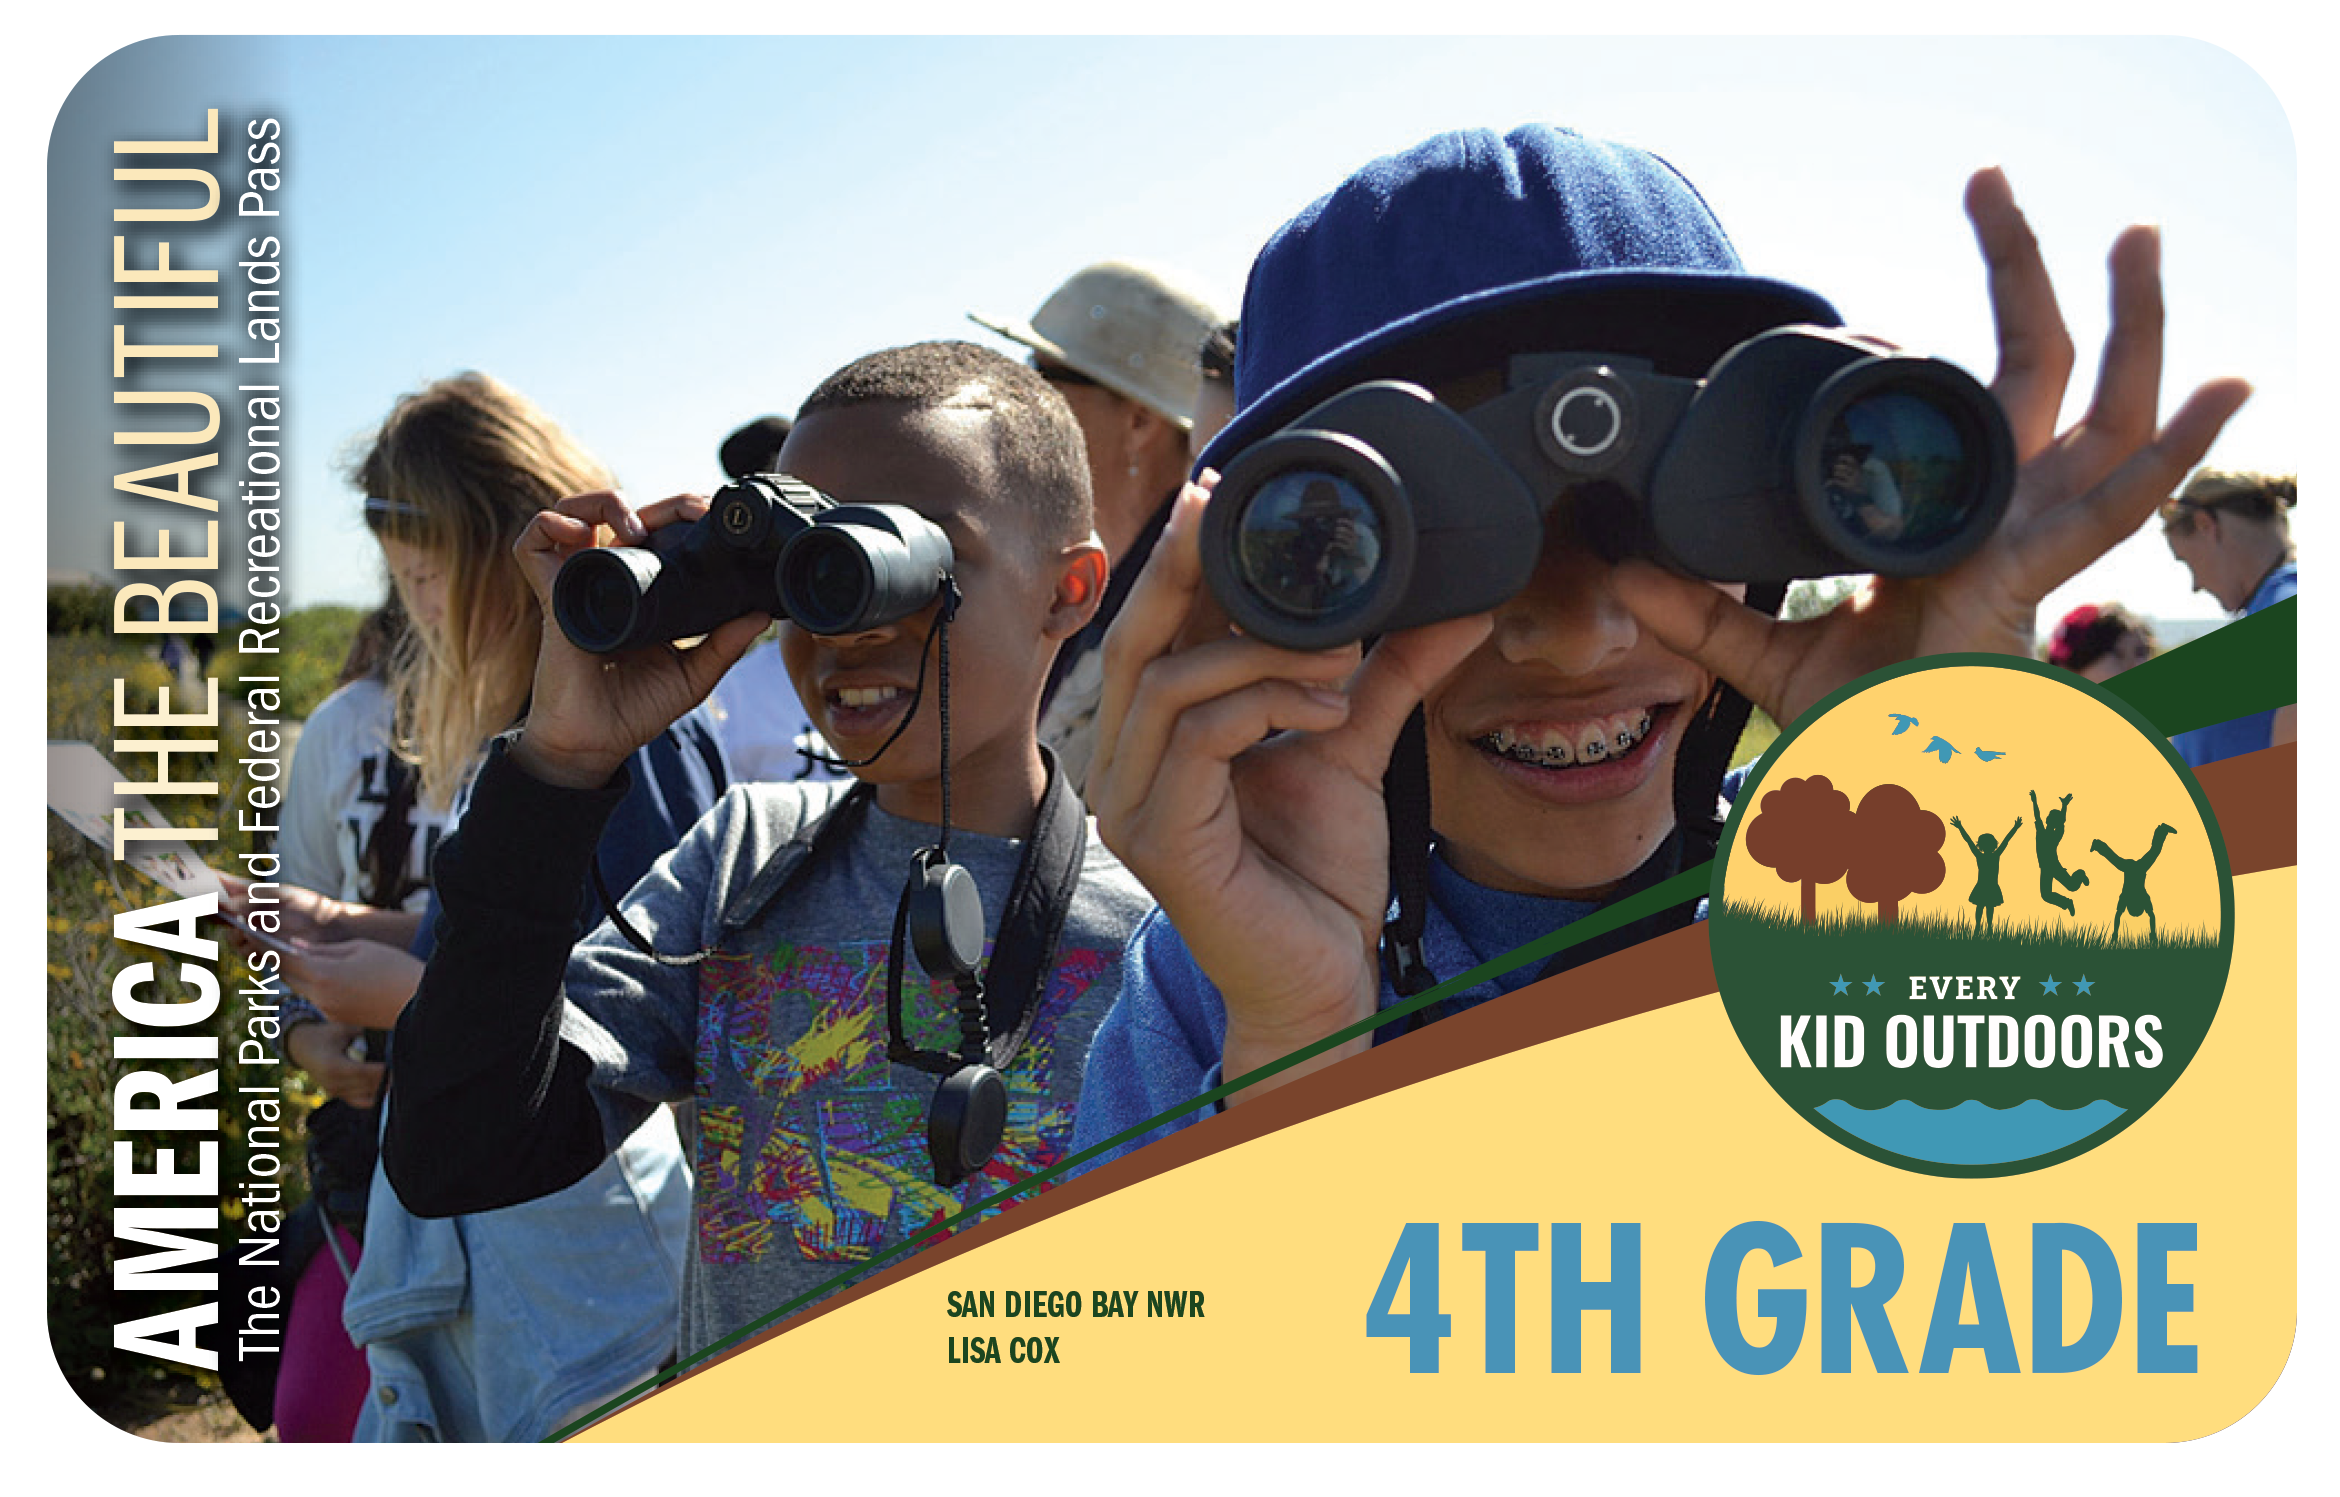 4th Grade America the Beautiful Pass with a photo of kids looking through binoculars